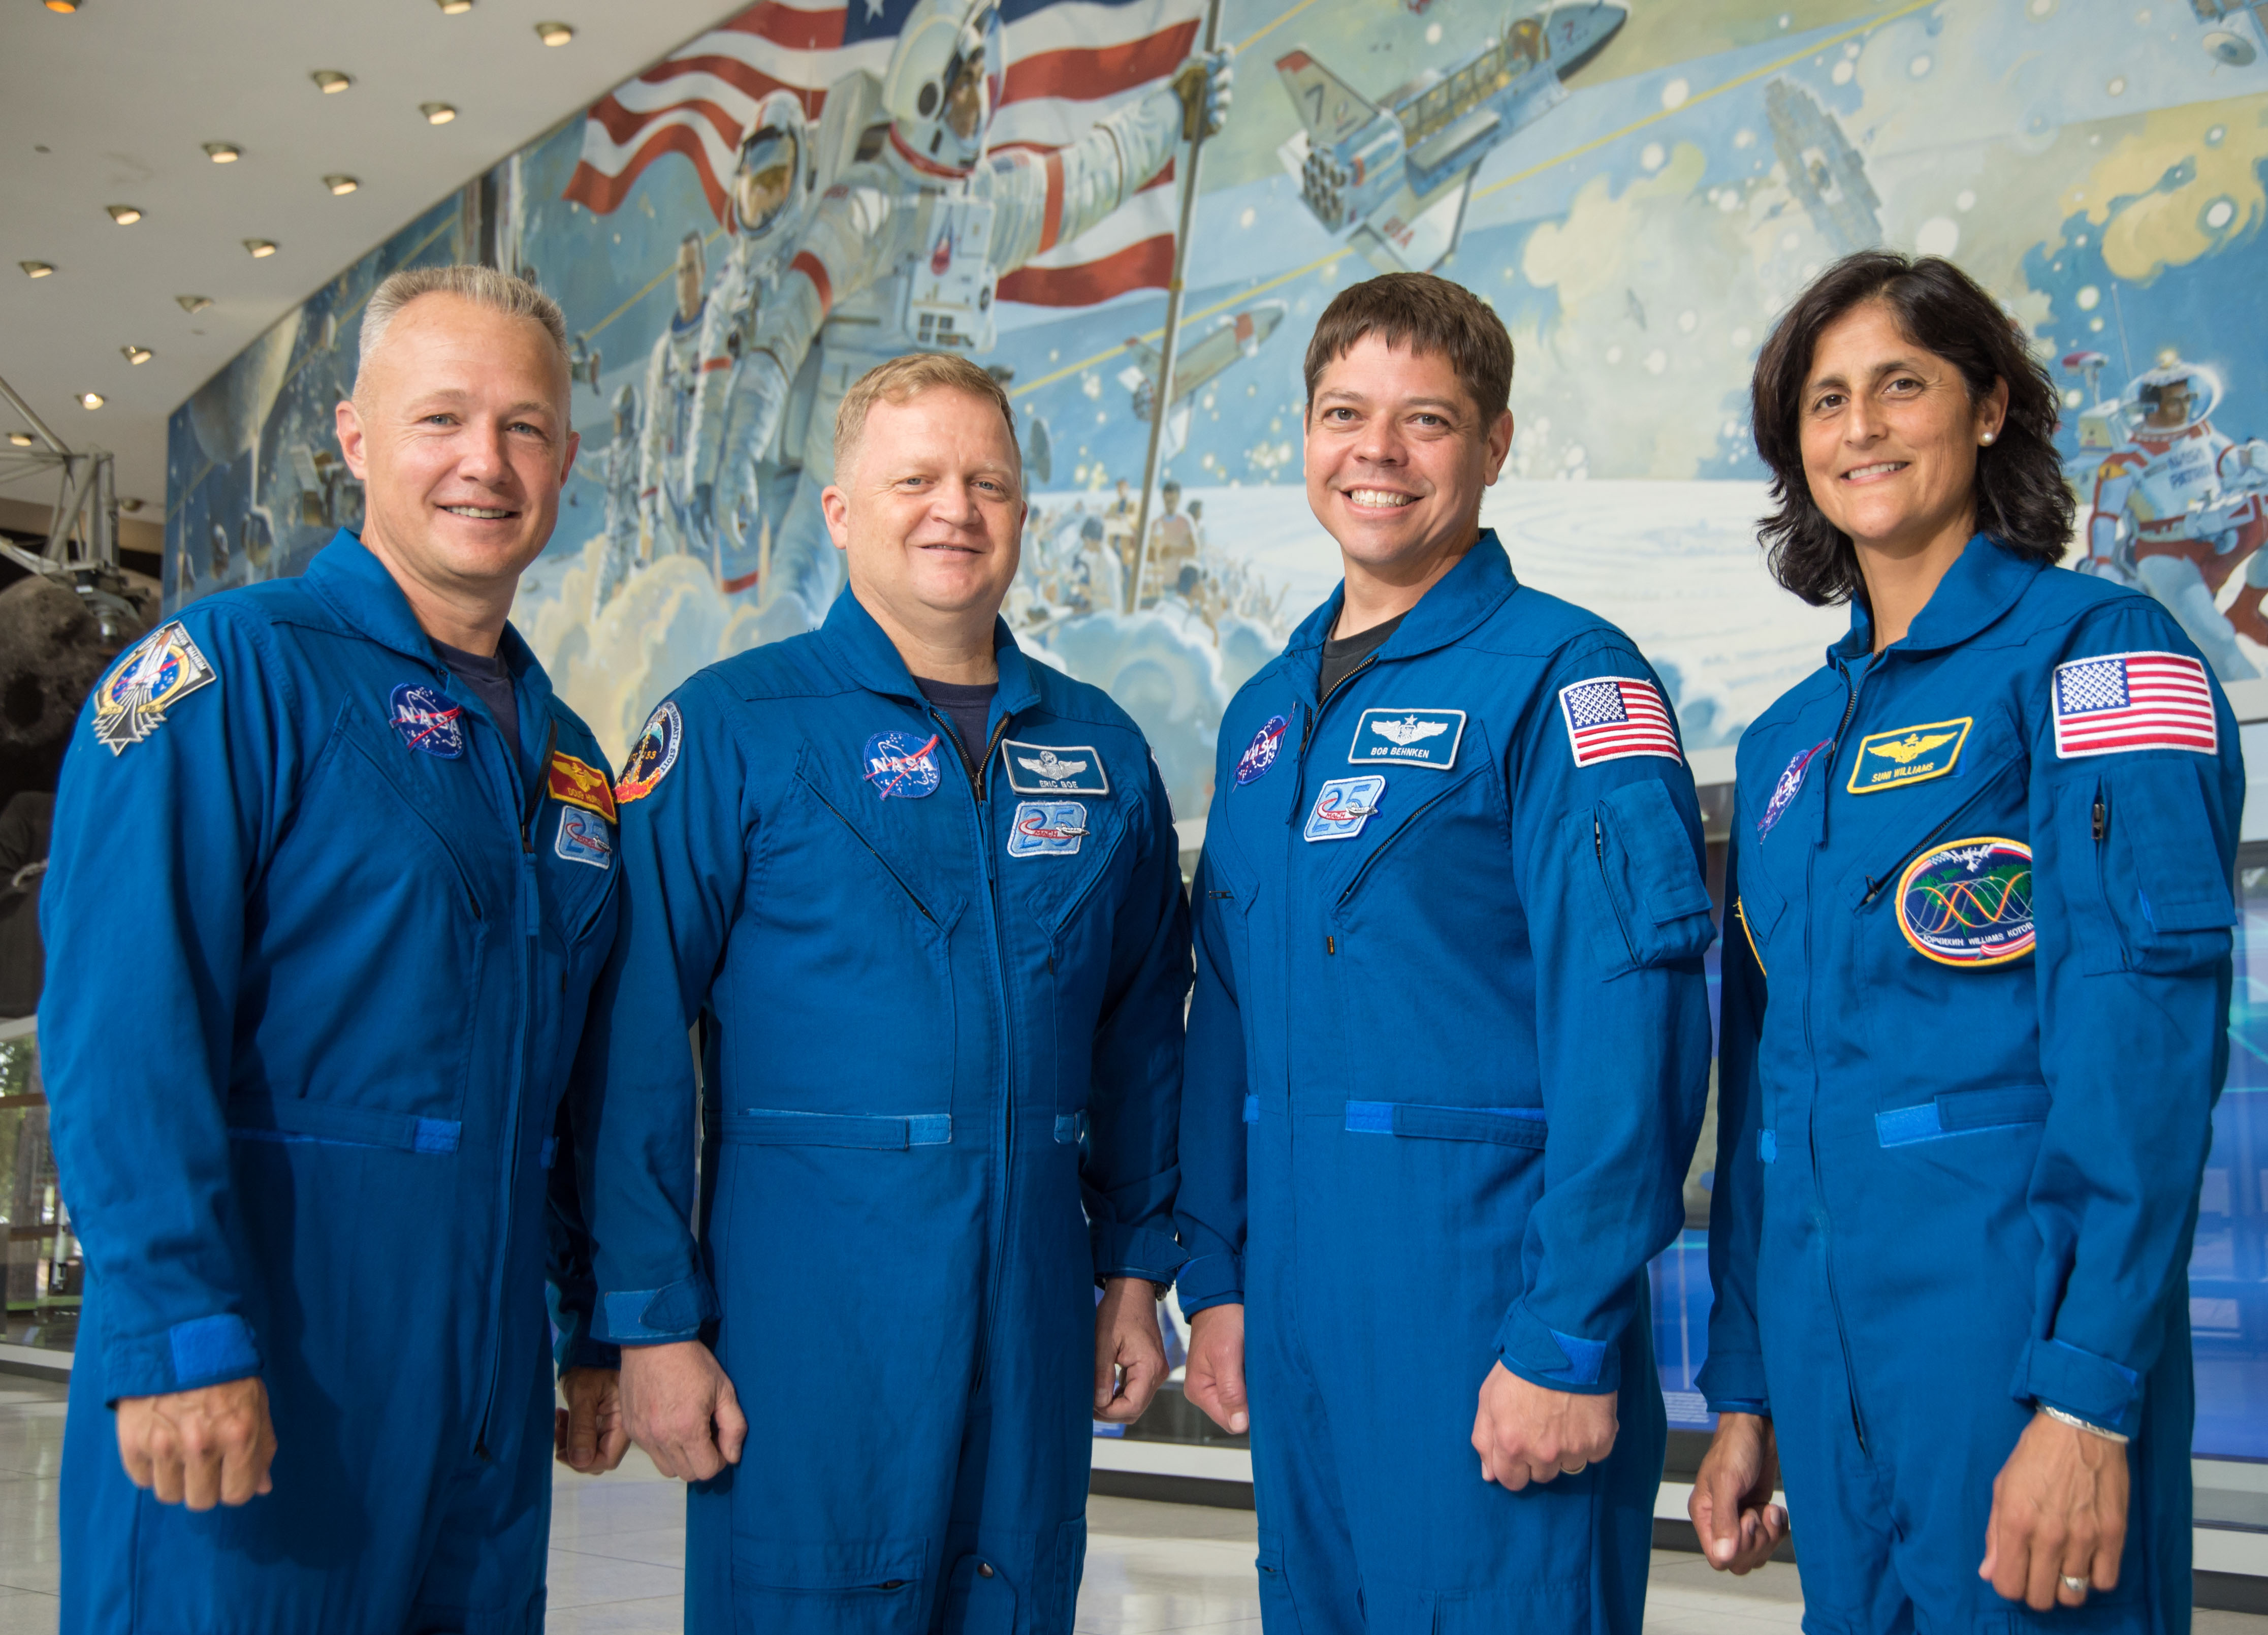 From NASA: "NASA's Commercial Crew astronauts Doug Hurney, Eric Boe, Bob Behnken and Suni Williams are working closely with Boeing and SpaceX this year as each company works toward flight tests." Photo Credit: NASA/James Blair